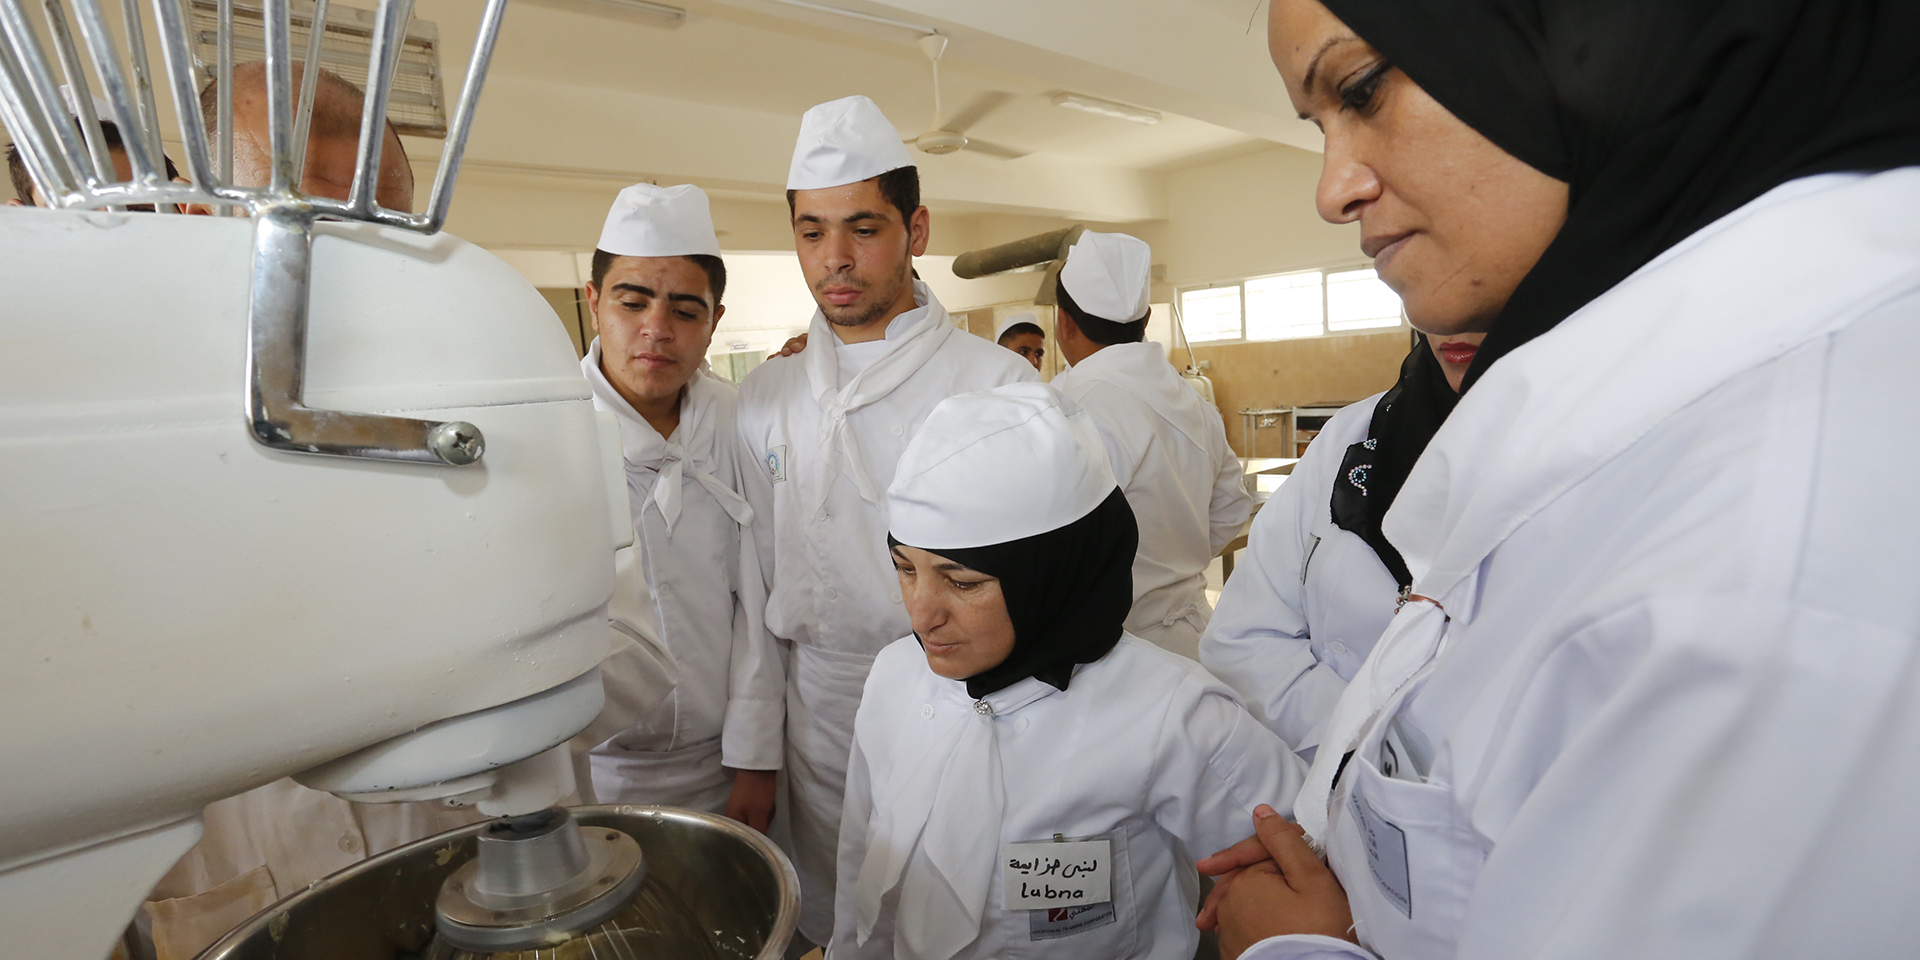 A group of cooks watching someone use a mixing machine.